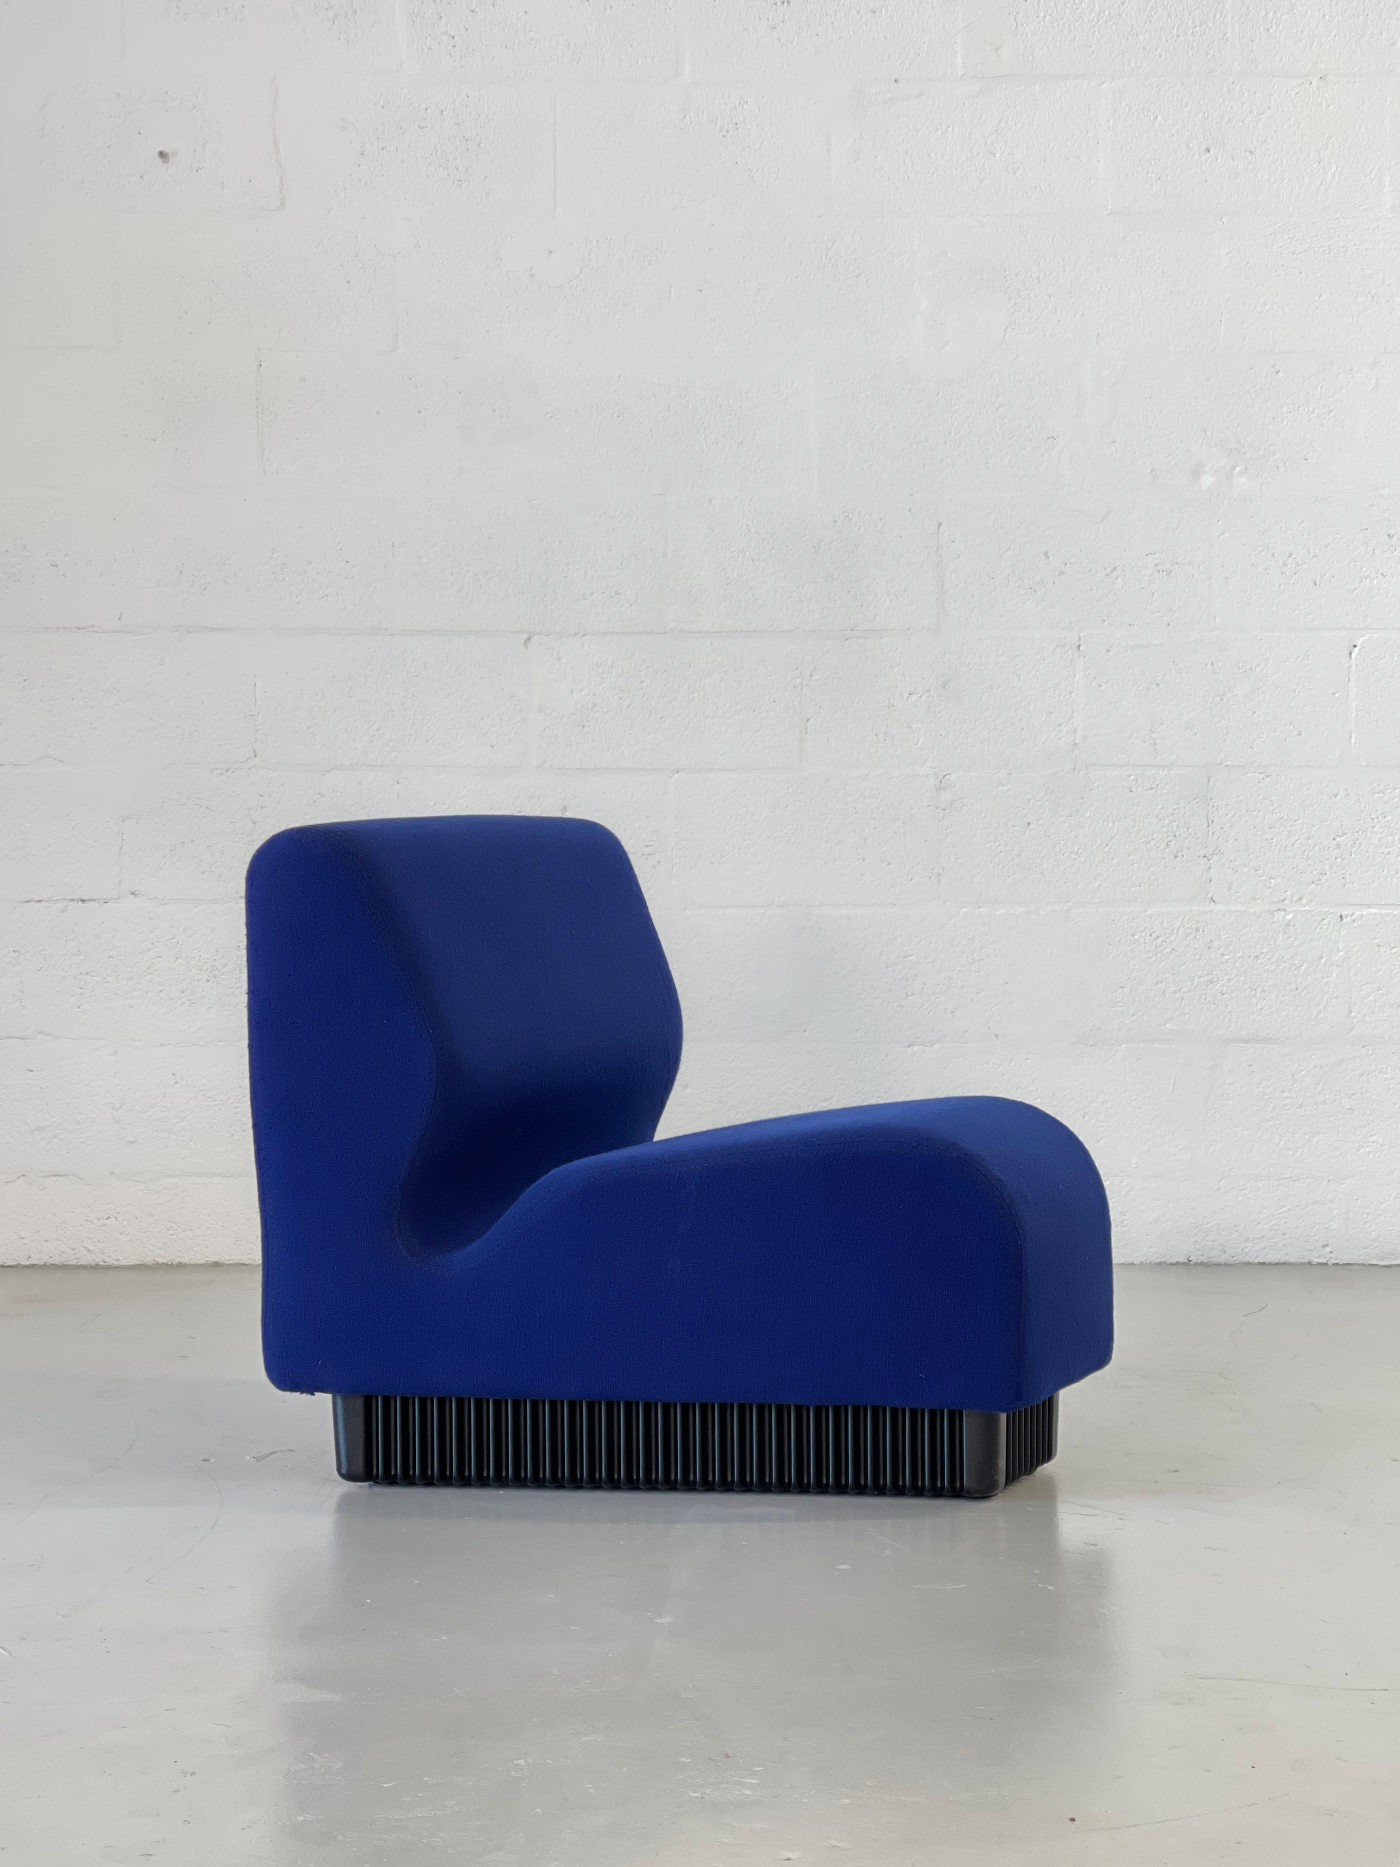 1970s Blue Slipper Chair by Don Chadwick for Herman Miller